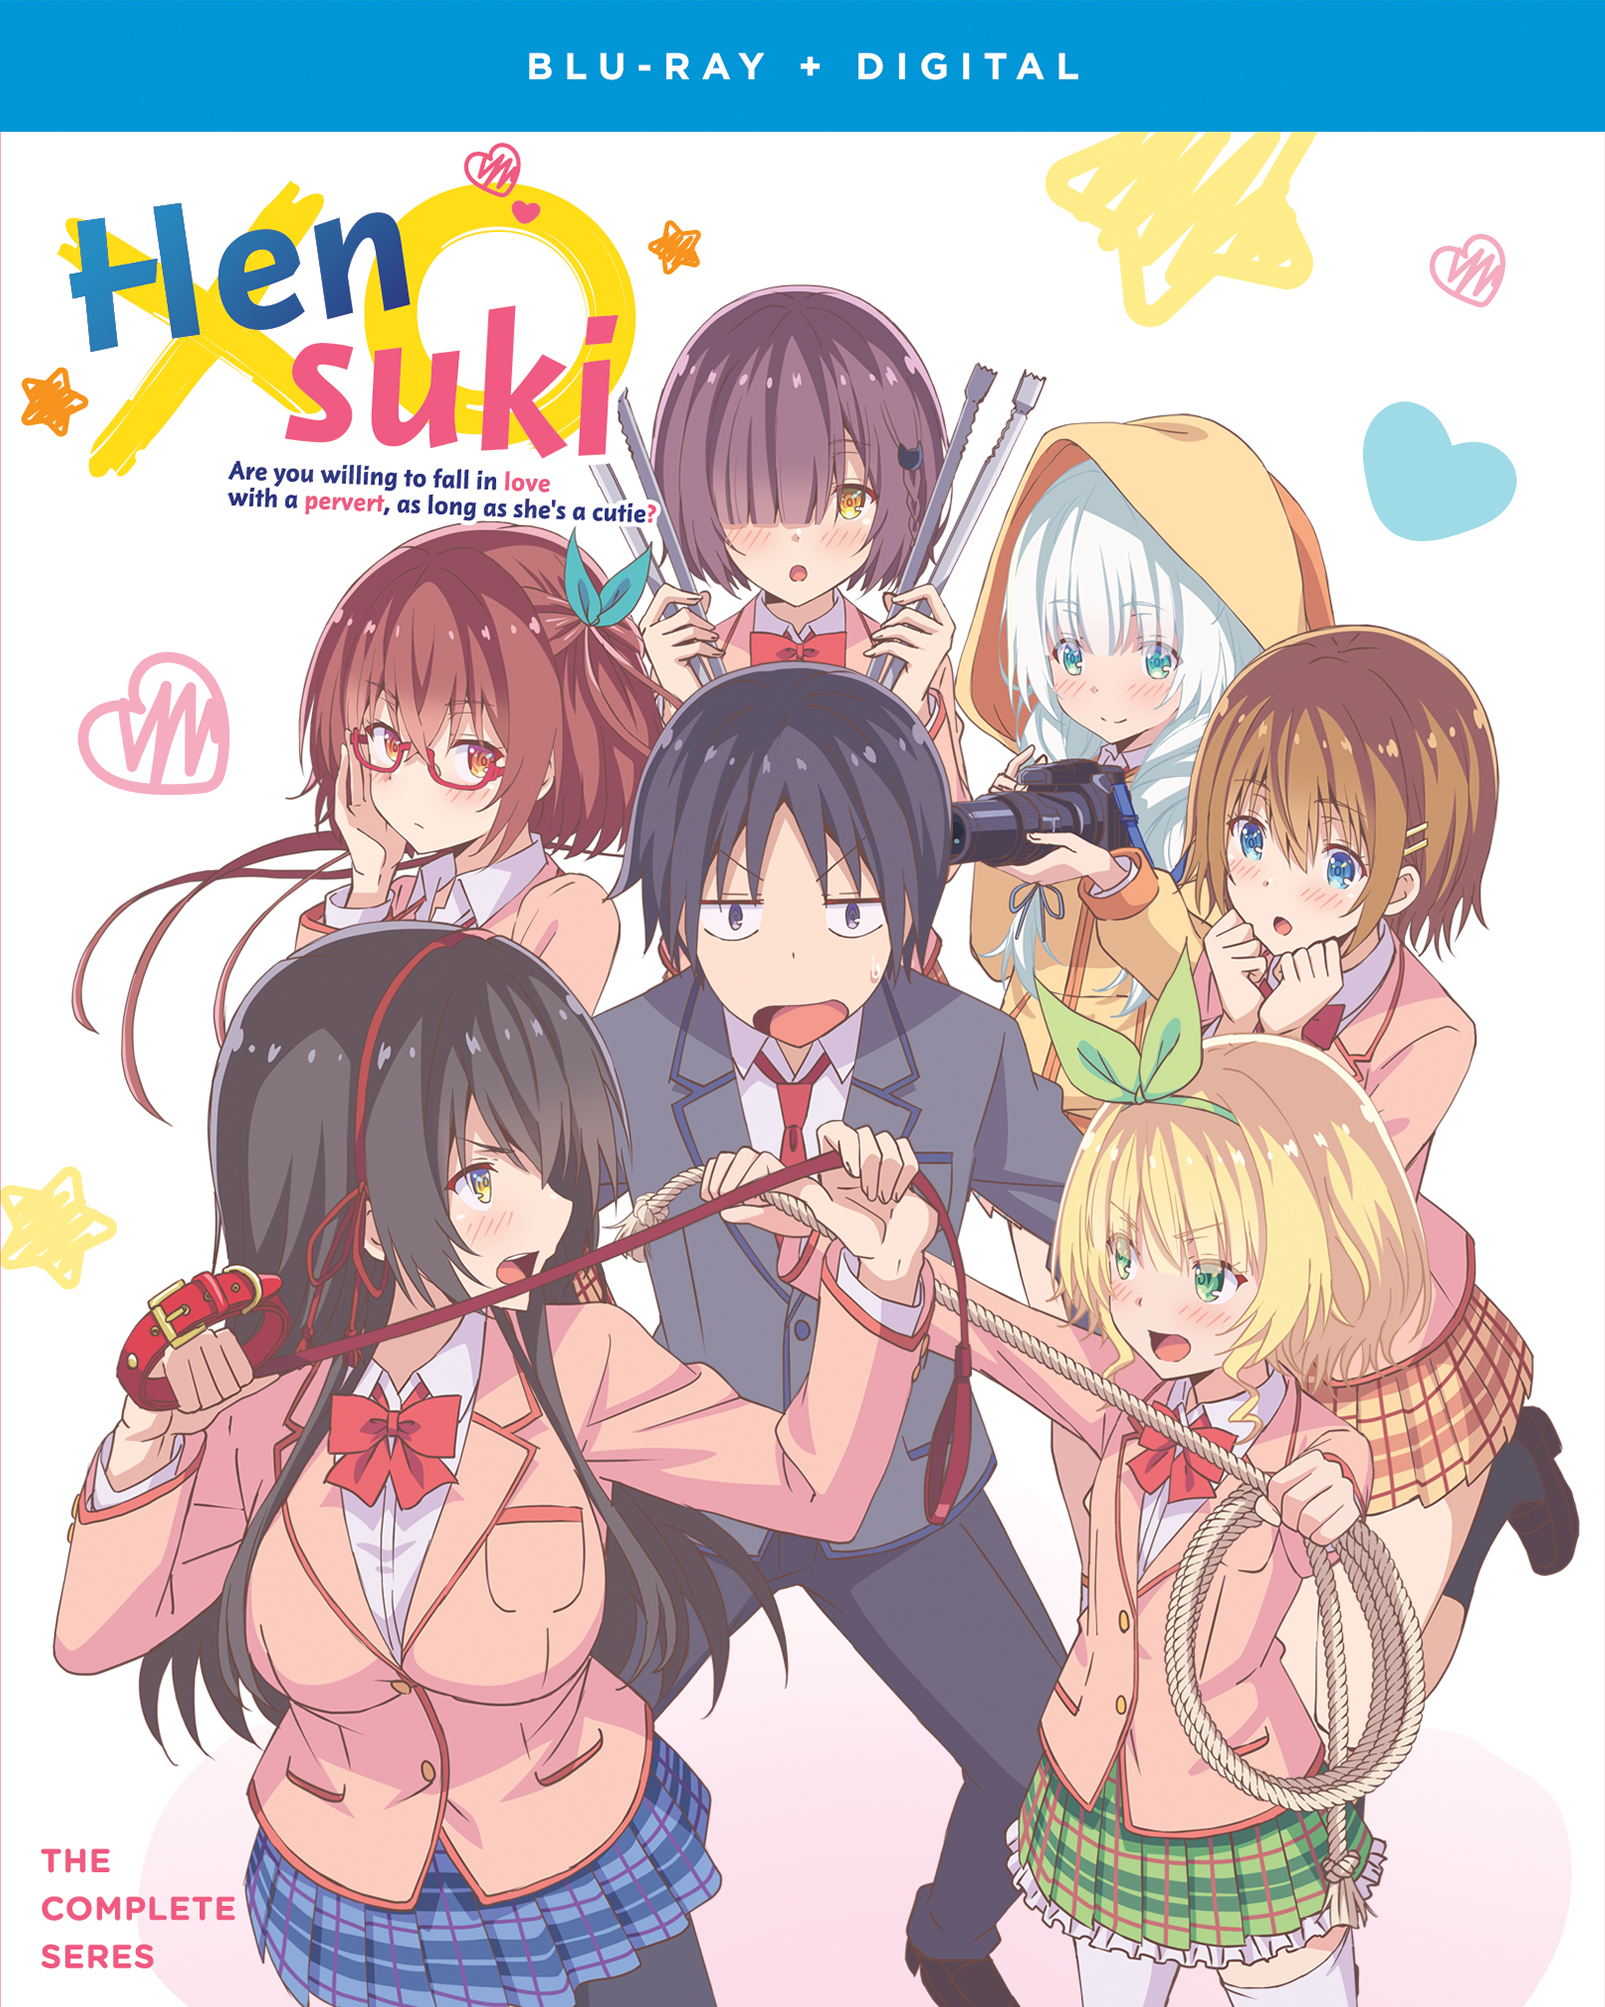 Hensuki: Are You Willing to Fall in Love with a Pervert, as Long as Long as  She's a Cutie? [Blu-ray] - Best Buy